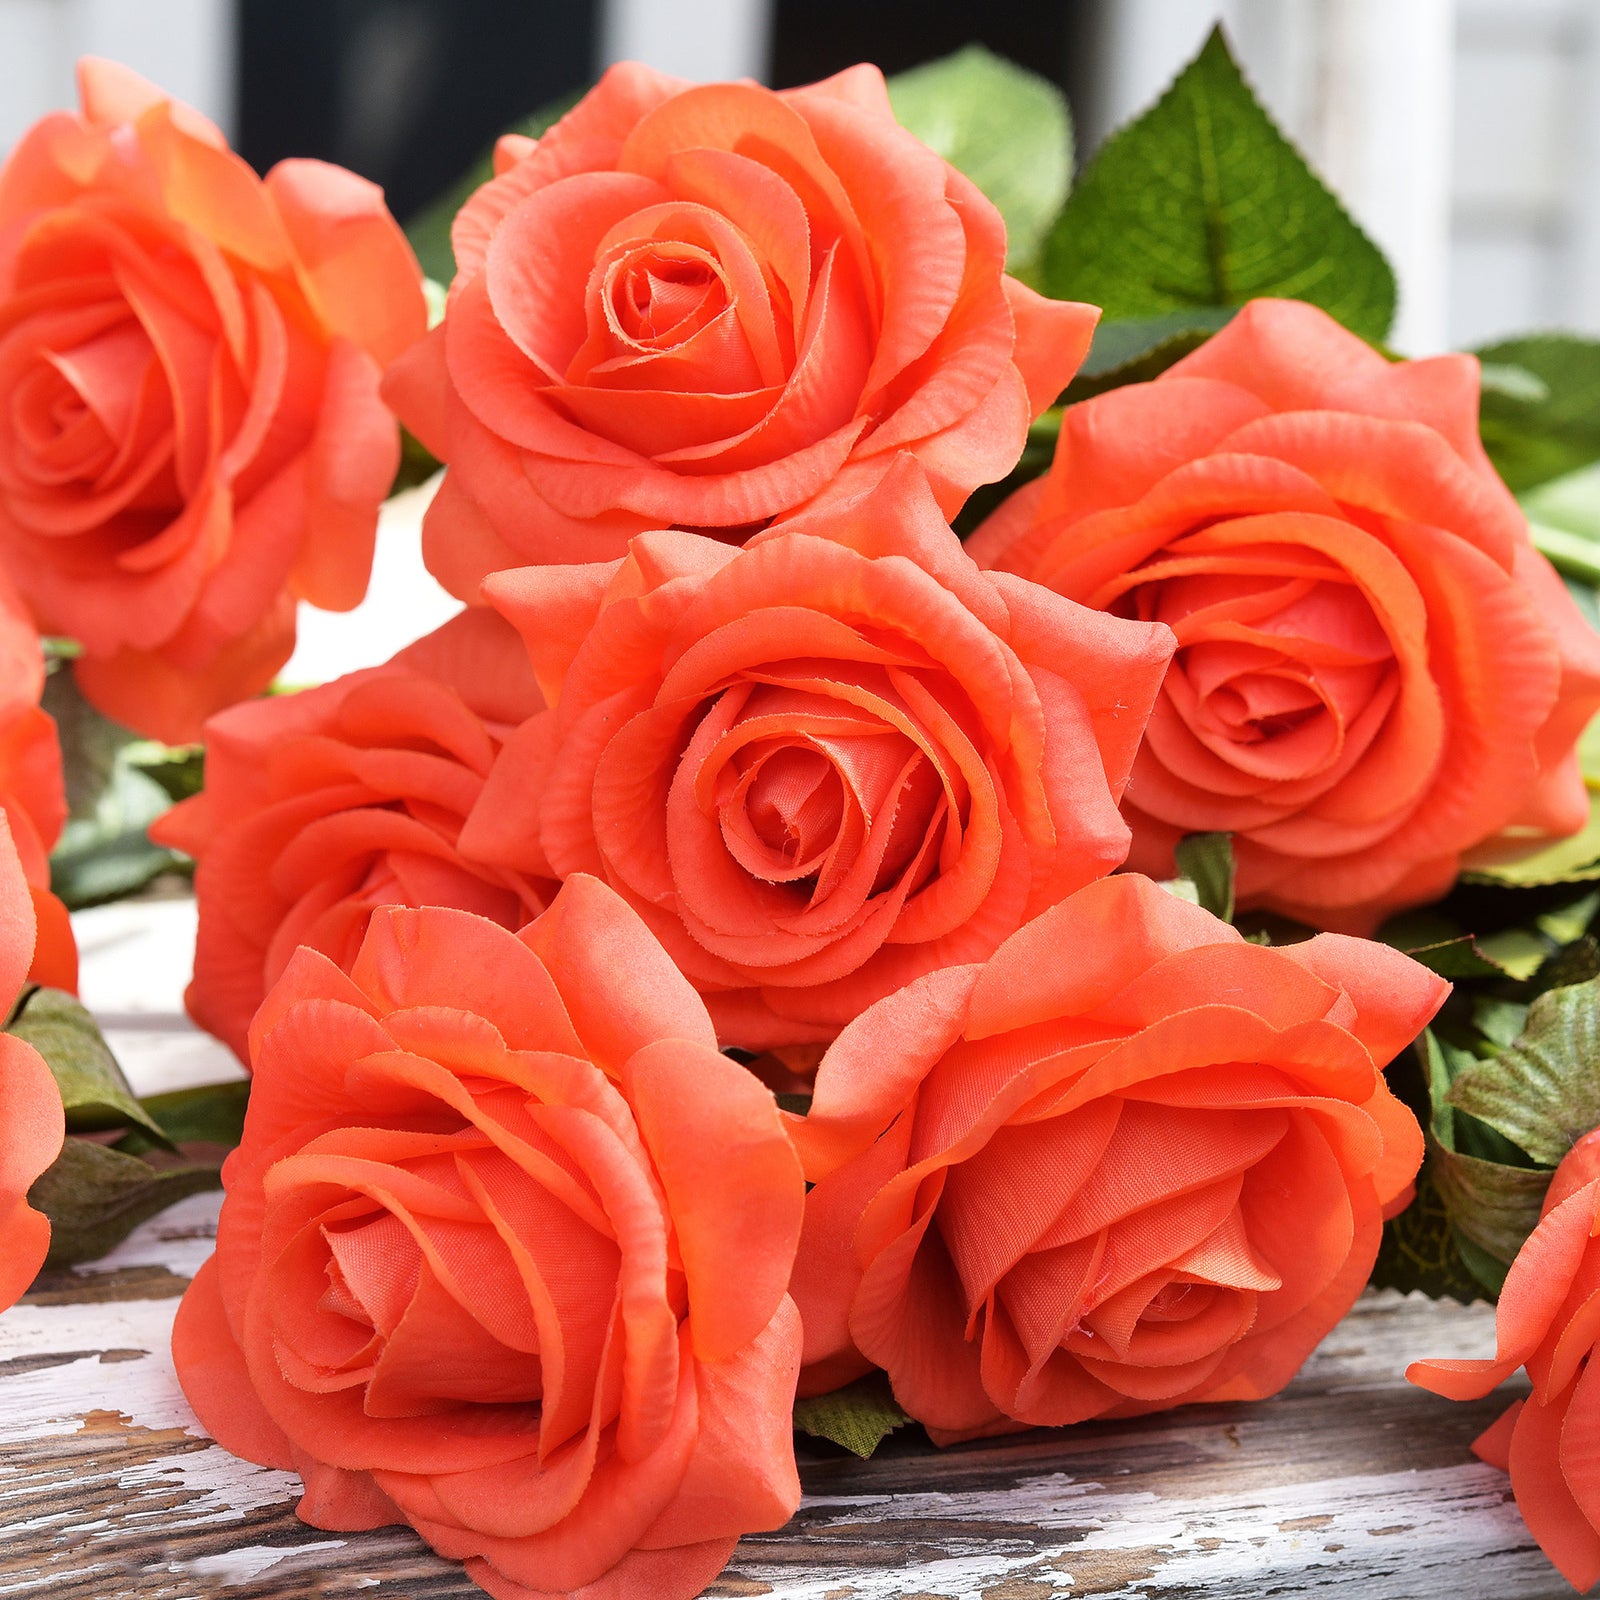 Sunset Orange Real Touch Roses Silk Artificial Flowers ‘Petals Feel and Look like Fresh Roses' (10 Stems)